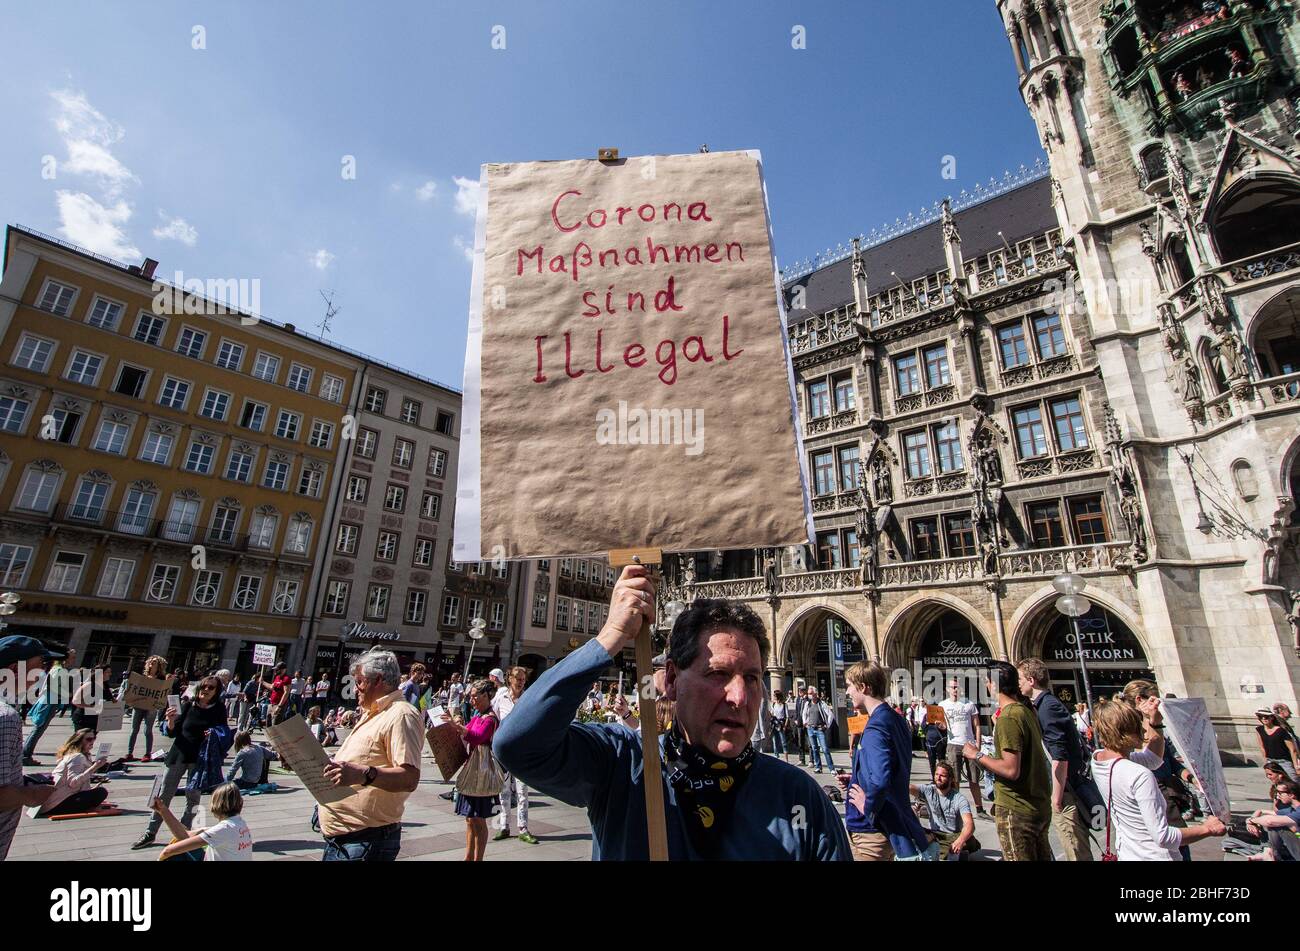 Munich, Bavaria, Germany. 25th Apr, 2020. ''Anti-Corona Measures are Illegal'' displayed during a QAnon-like demonstration in Munich, Germany. Organized in Telegram chats by conspiratorial "Querfront"" (cross-front) groups, the city of Munich, Germany saw numerous anti-state "Corona Parties"" as under mottos such as "Demonstration fuer die Erhaltung der Grundrechte"" (Demonstration for the Upholding of Basic Rights) and "Fuer unsere Freiheit, unsere Grundrechte und unsere Selbstbestimmung"" (Demonstration for our Freedom, Basic Rights, and Self-Determination). Numerous right-extr Stock Photo